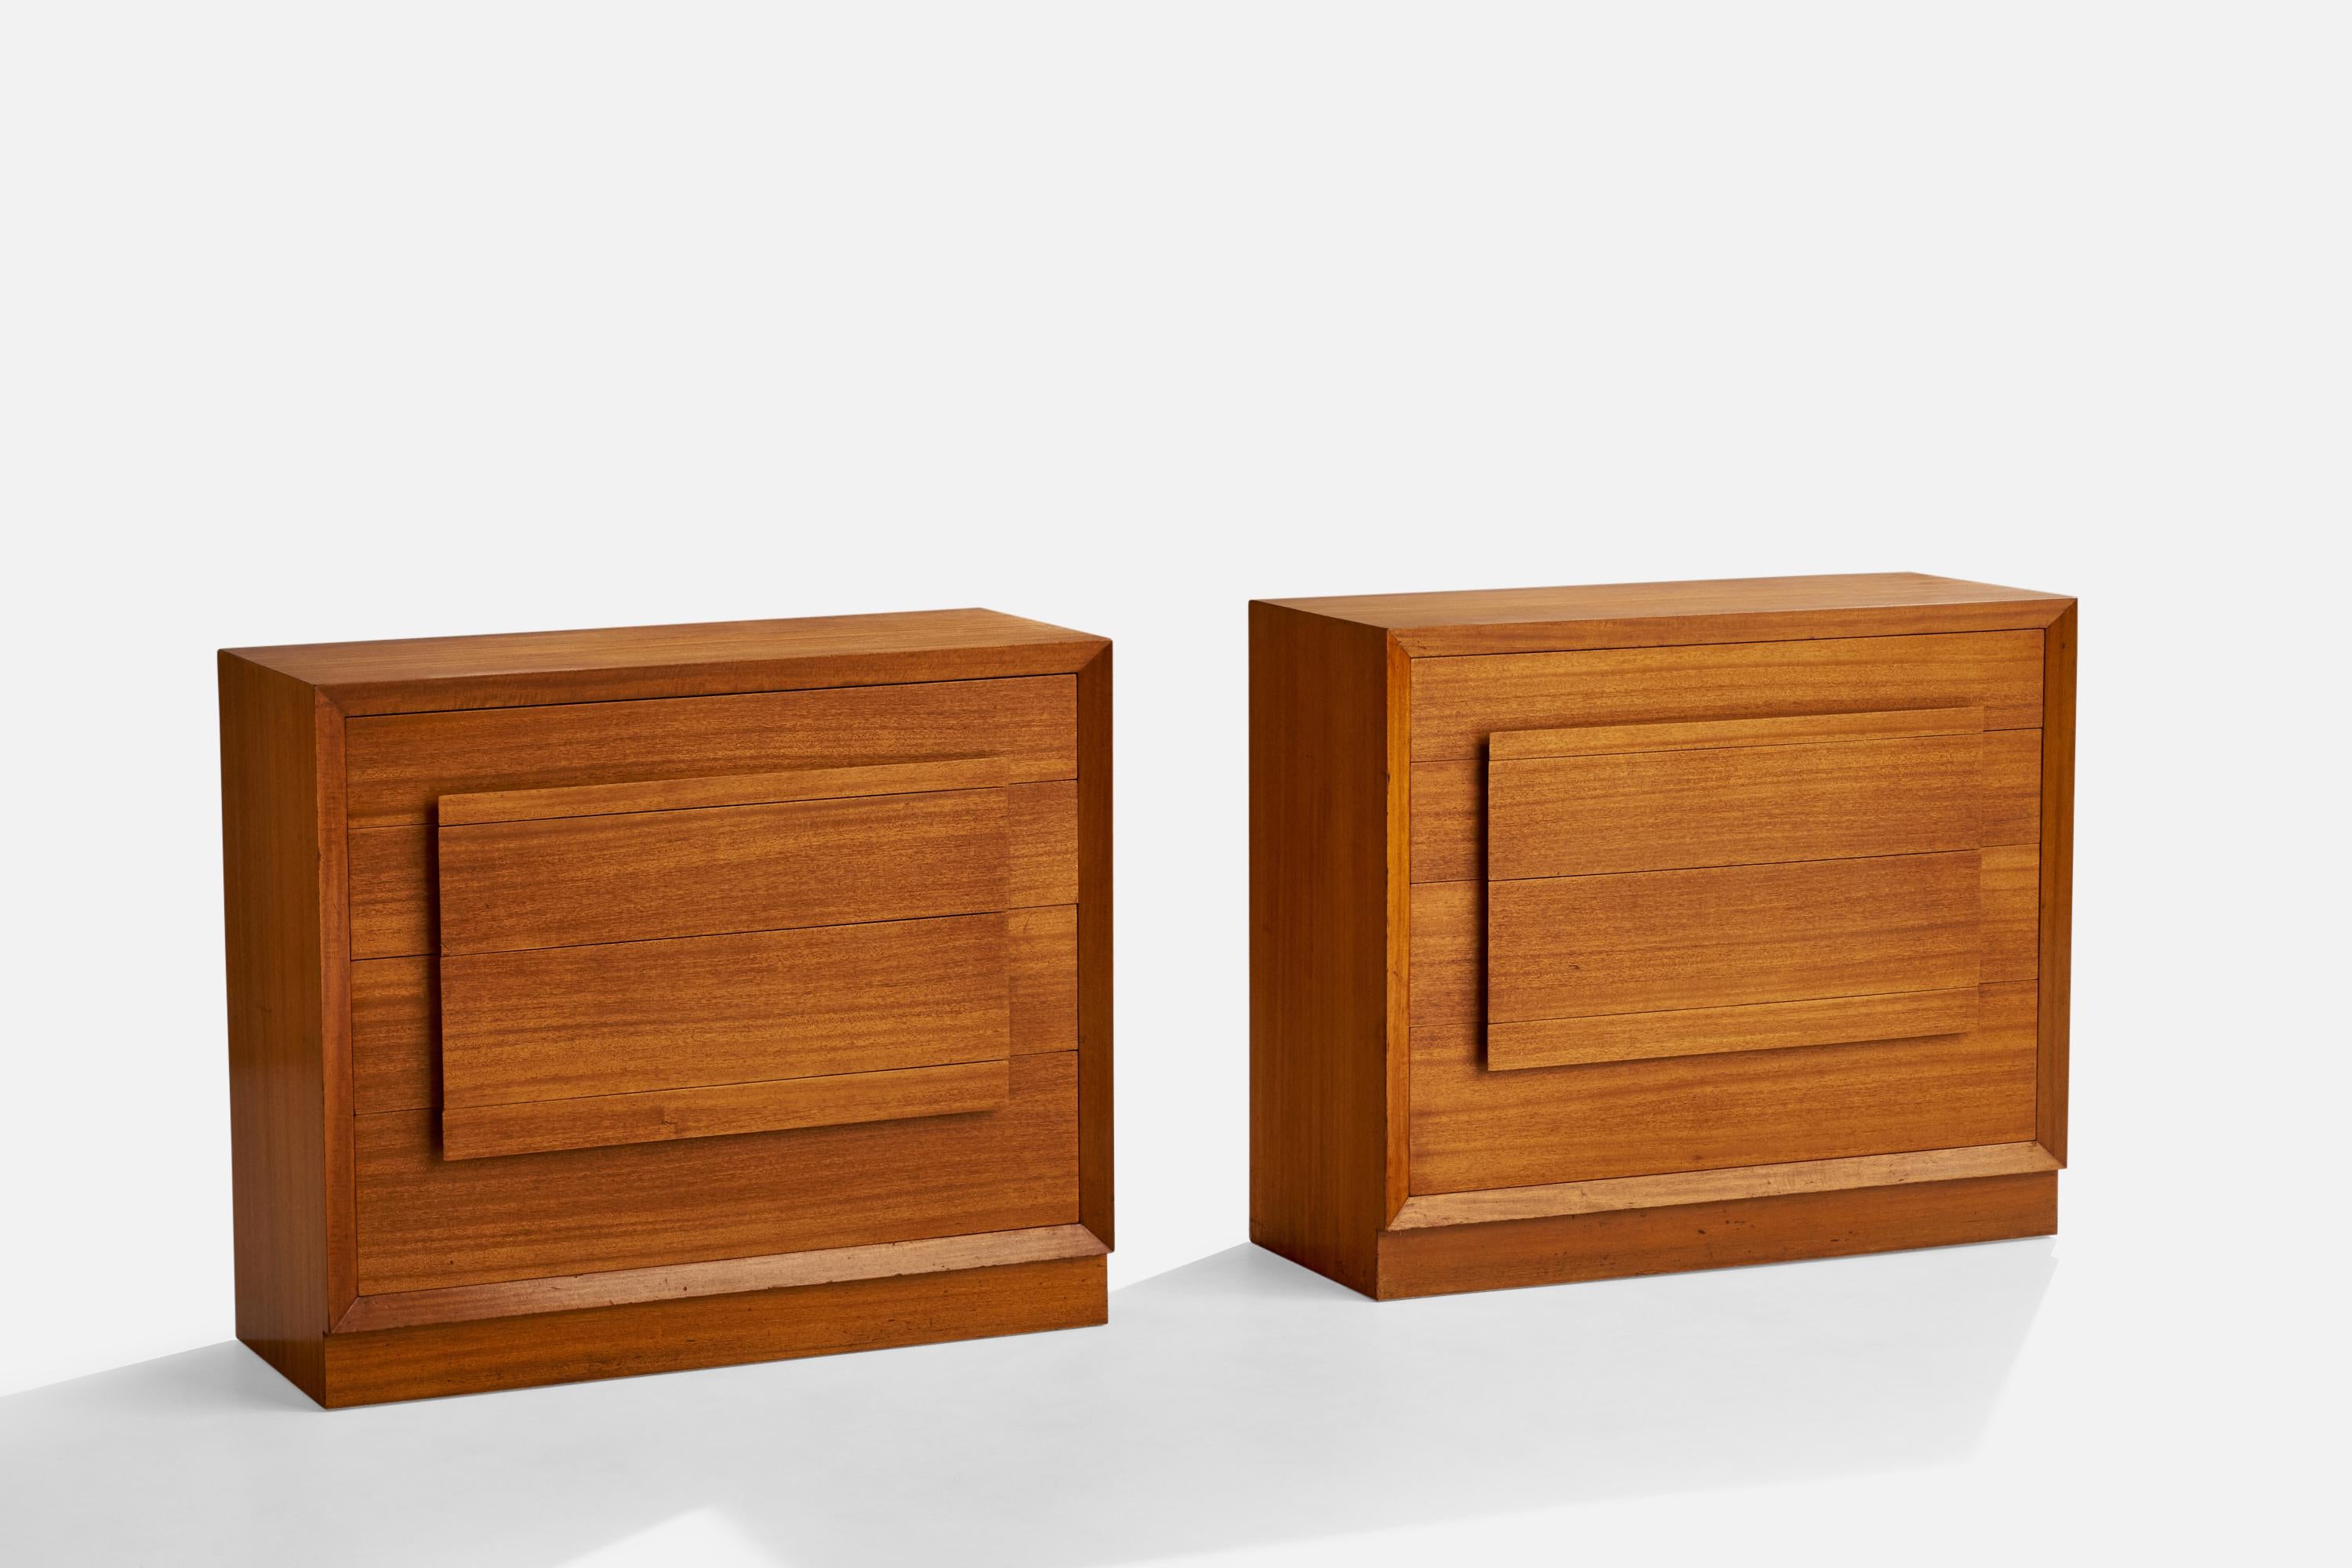 A pair of walnut chests of drawers designed and produced in the US, 1940s.